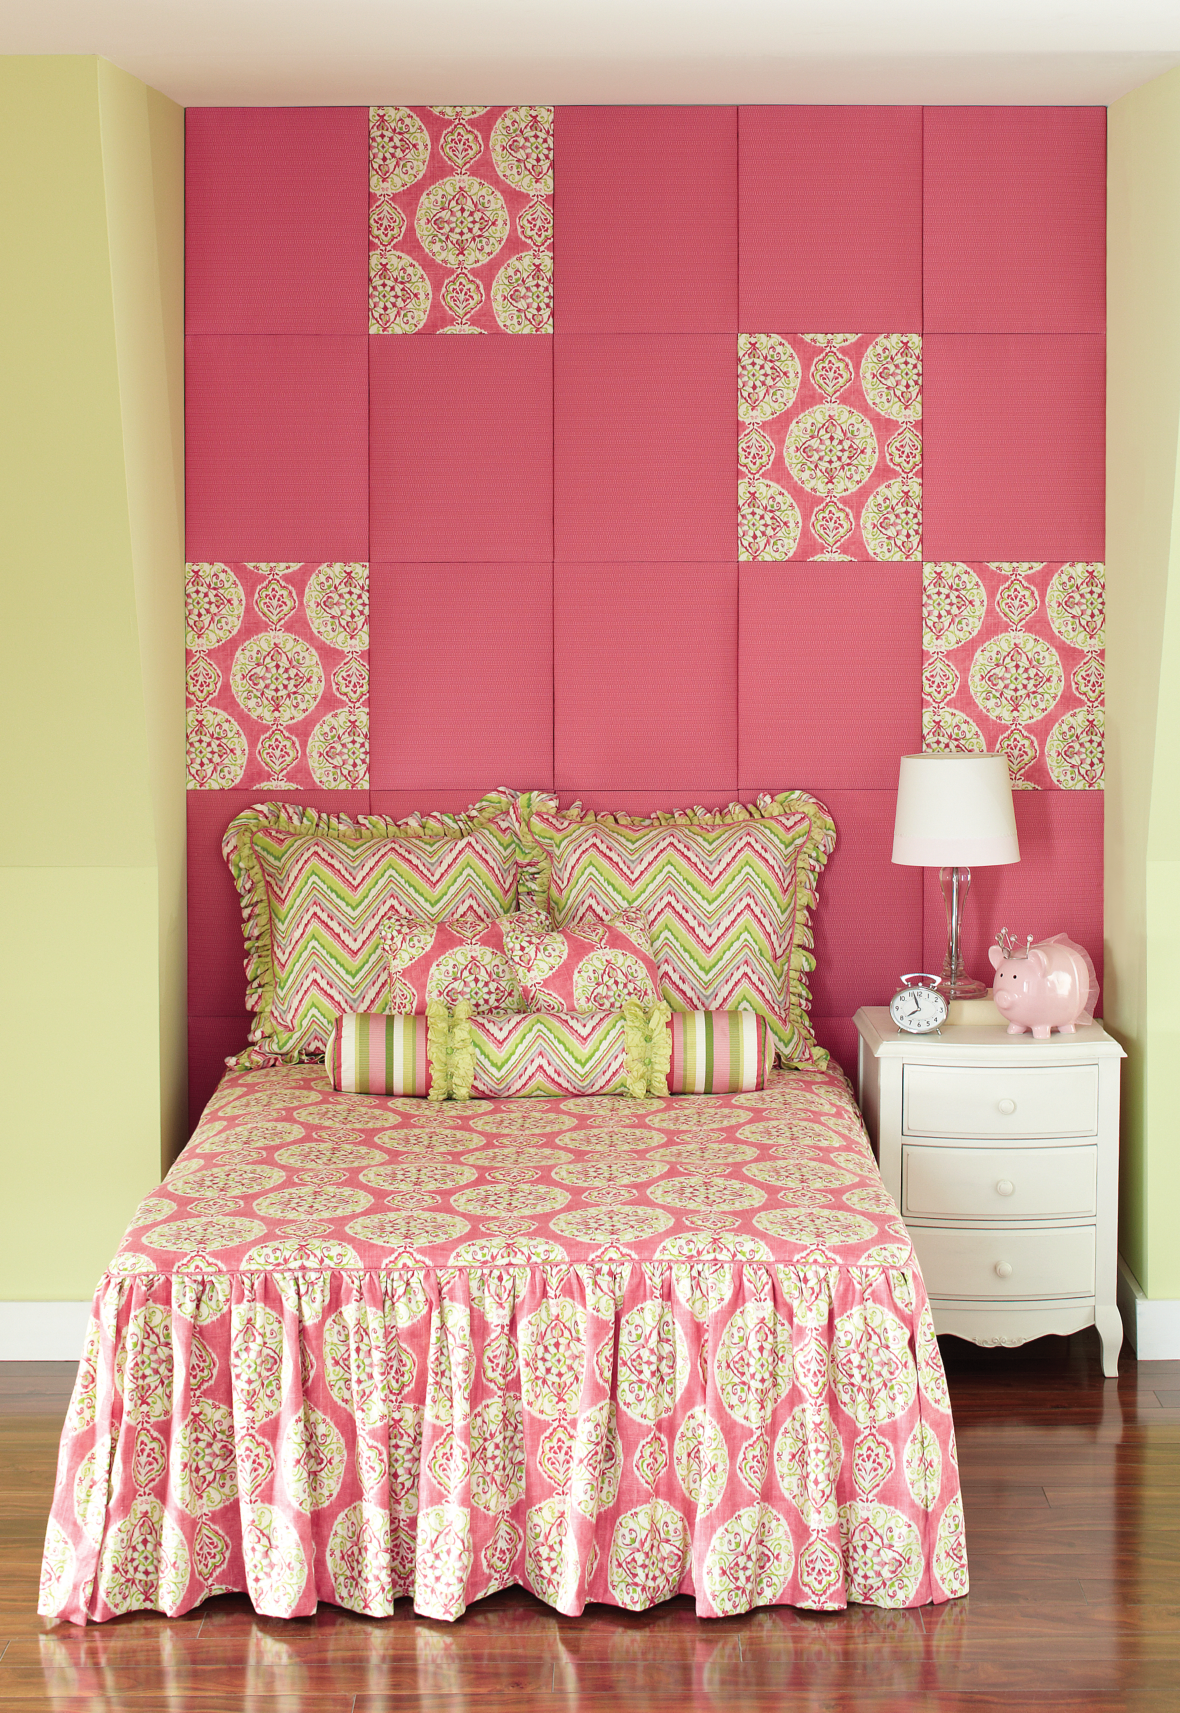 Young Girl's Bedroom - Upholstered Wall